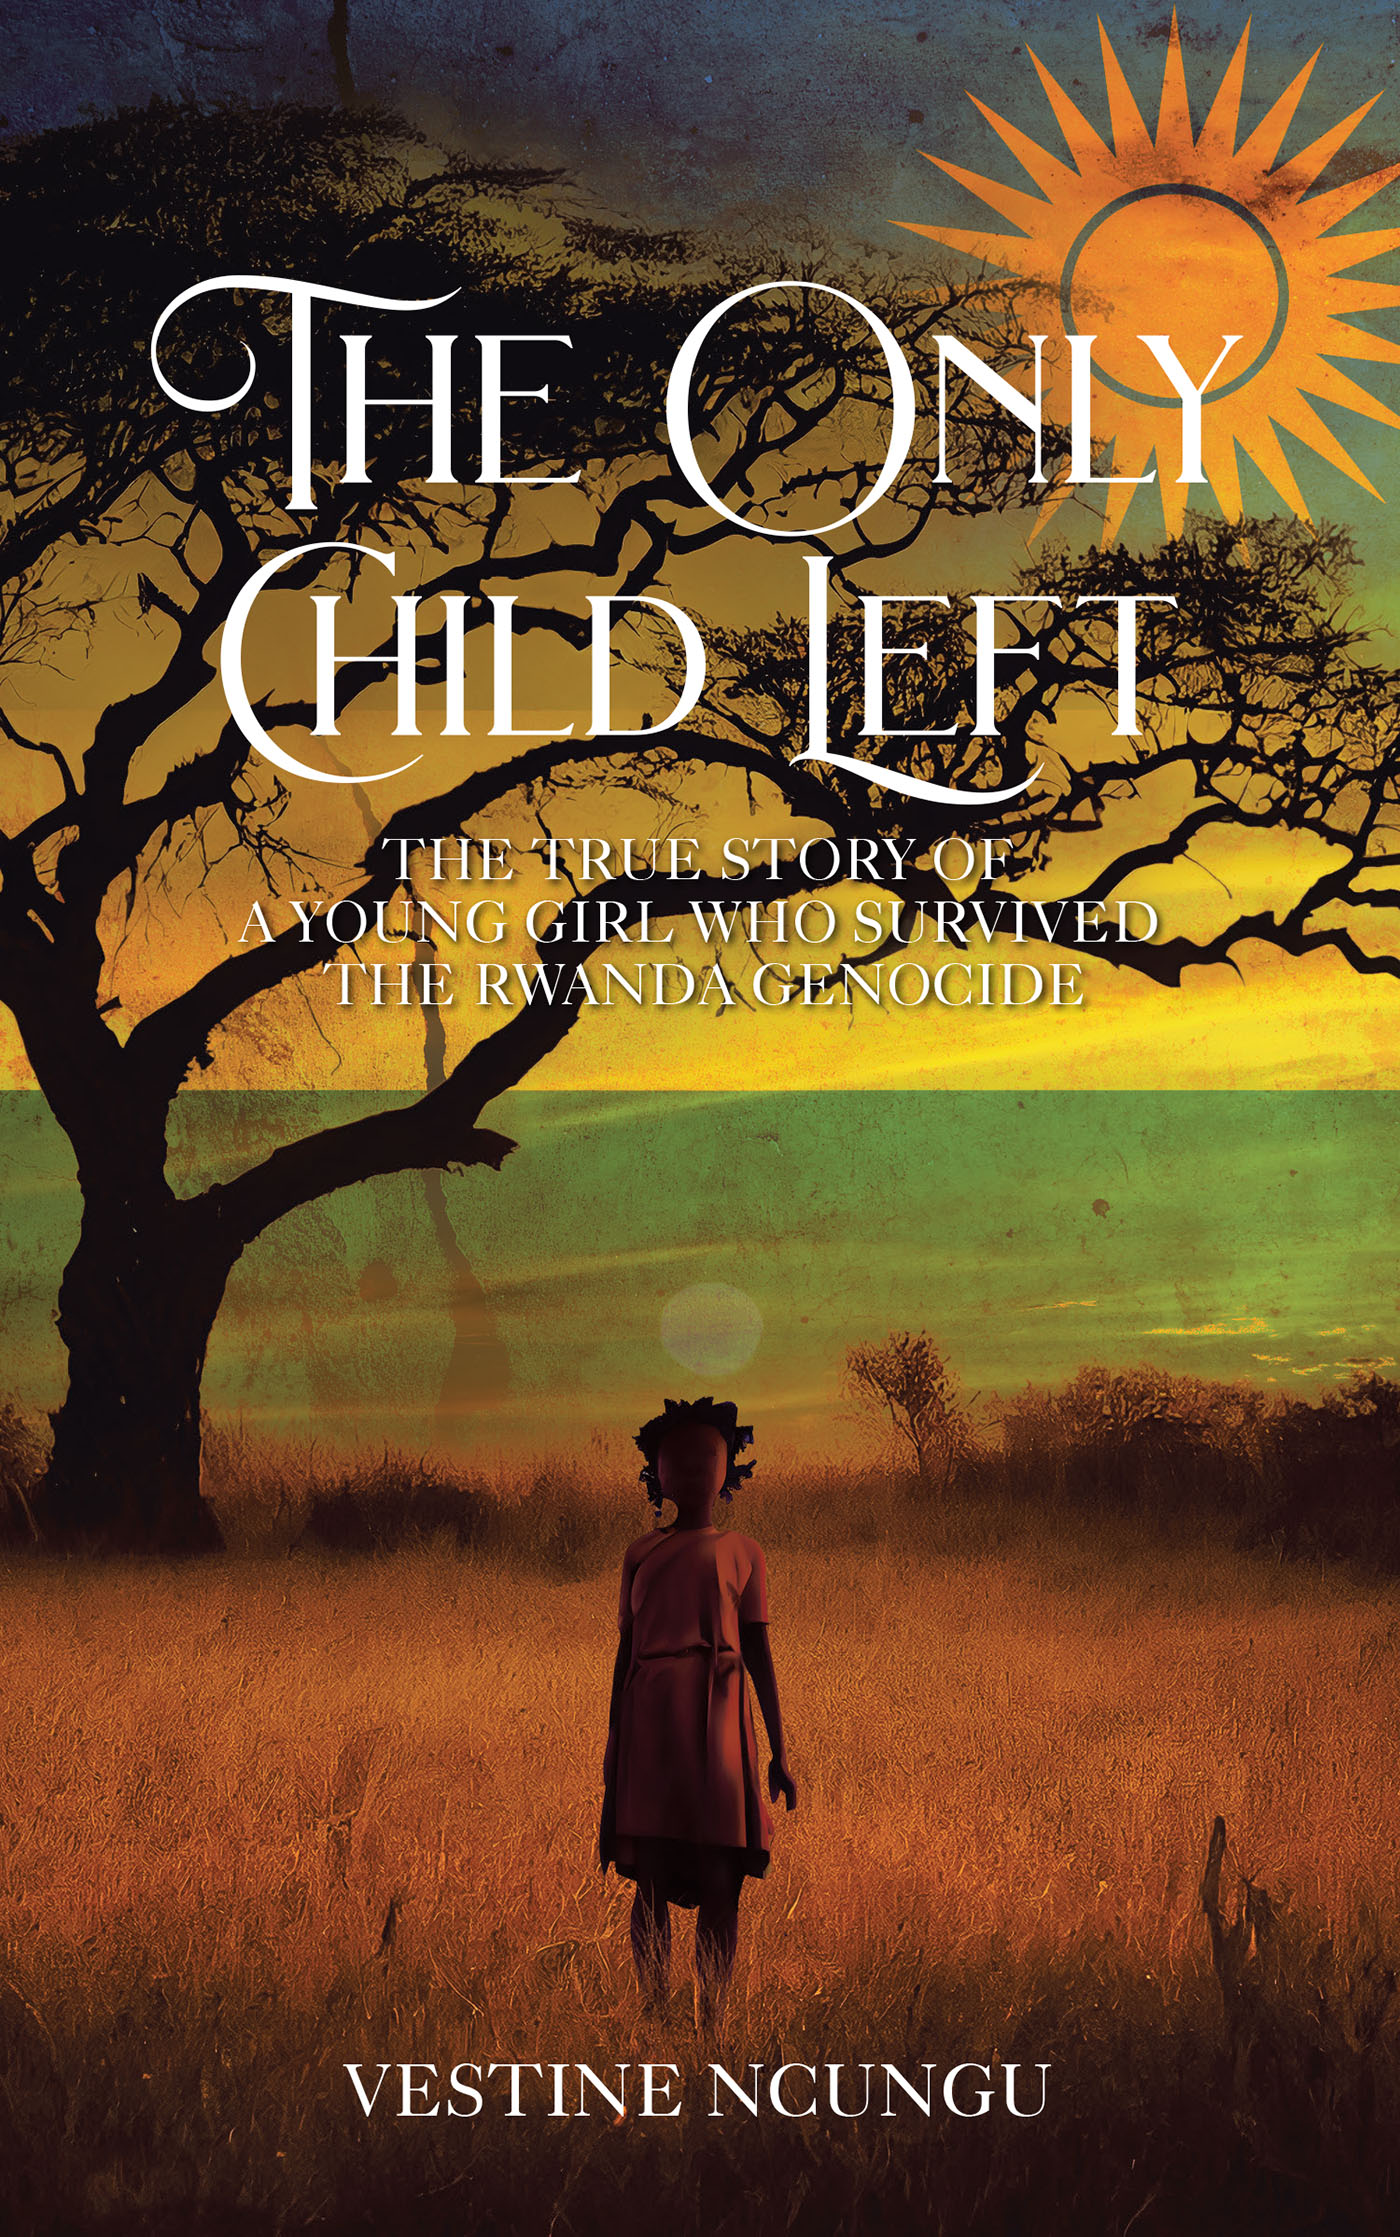 Vestine Ncungu’s Newly Released “The Only Child Left: The True Story of a Young Girl Who Survived the Rwanda Genocide” is a Powerful Story of Survival